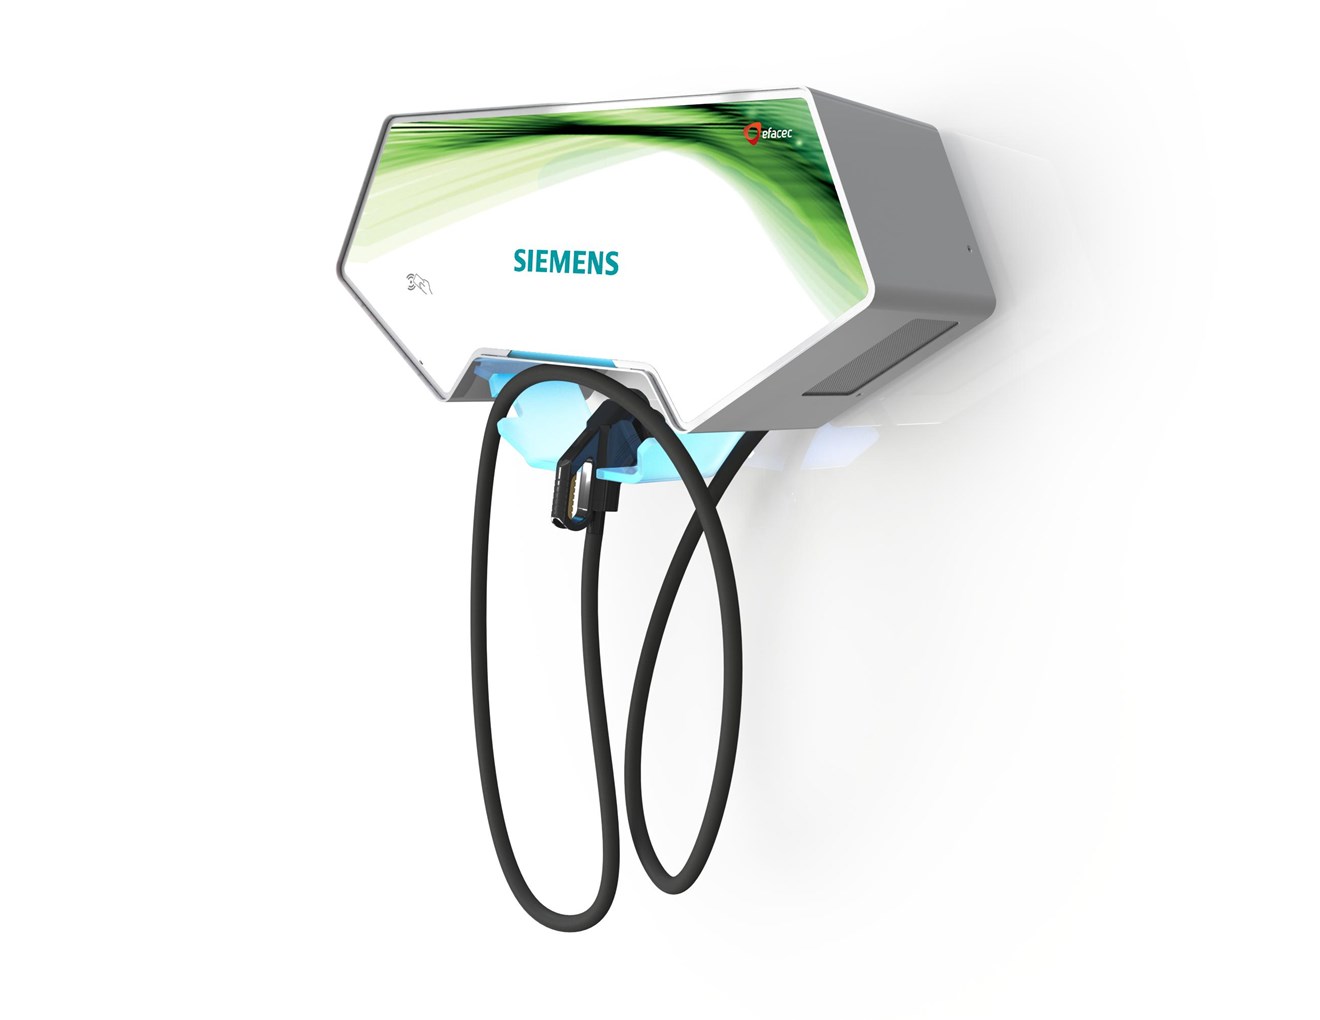 Siemens unveils new electric vehicle charging solutions